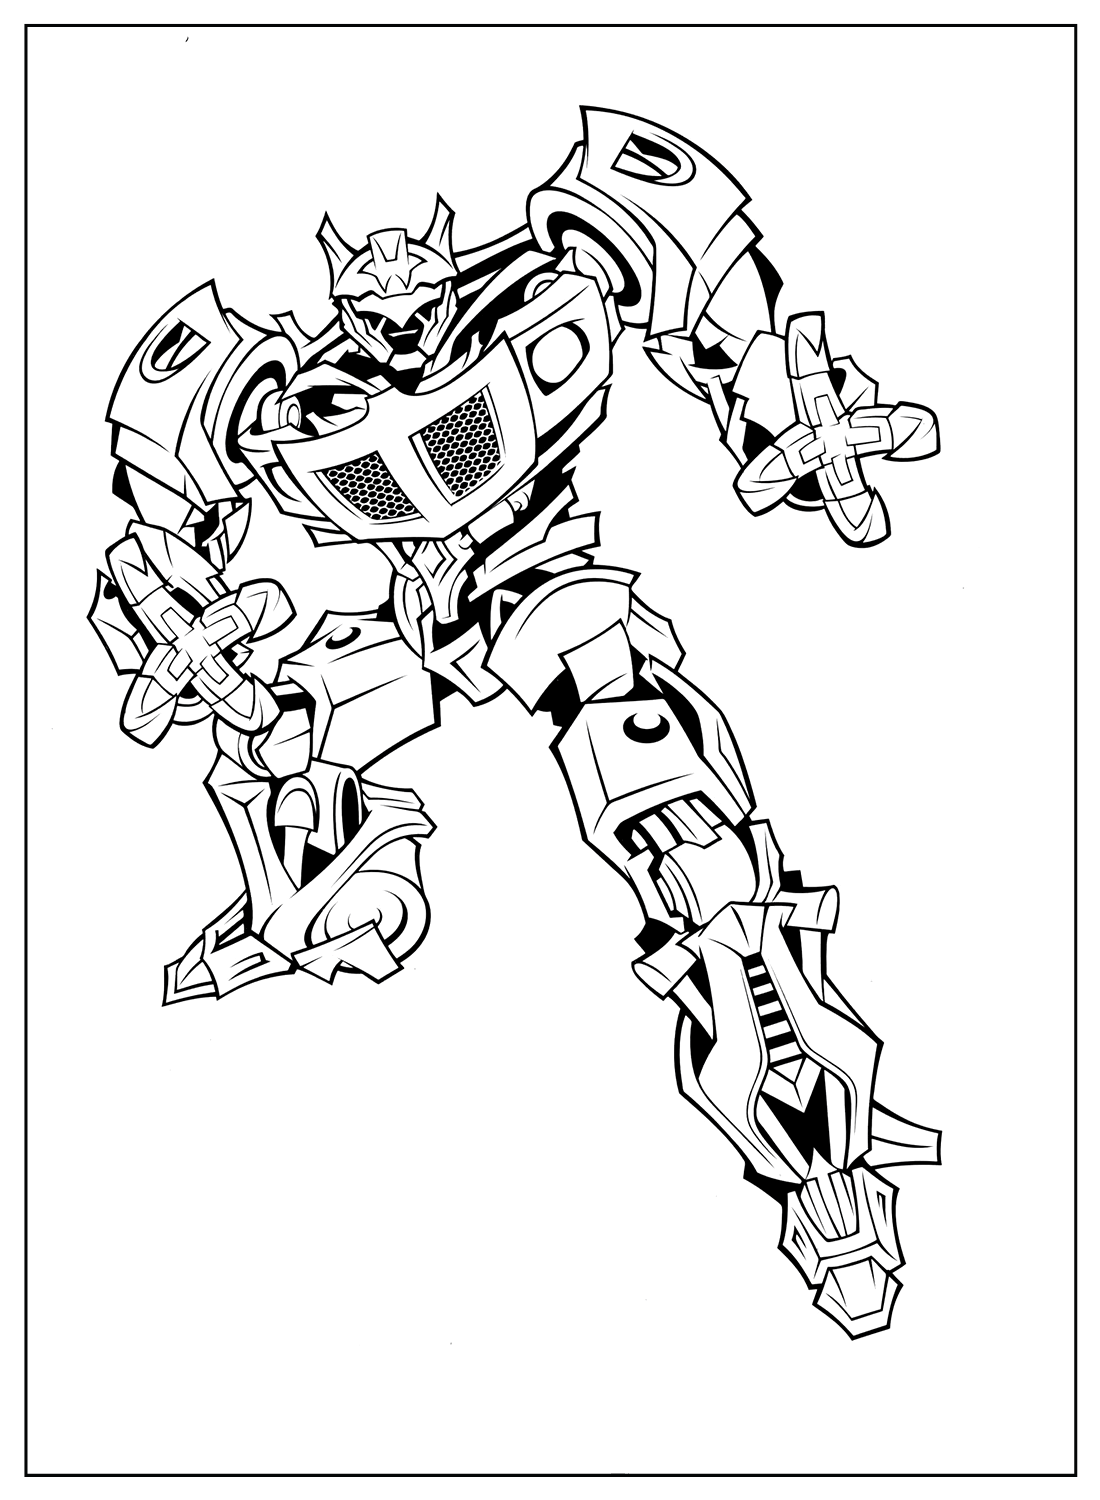 Transformers Age Of Extinction Coloring Page from Transformers: Age Of Extinction